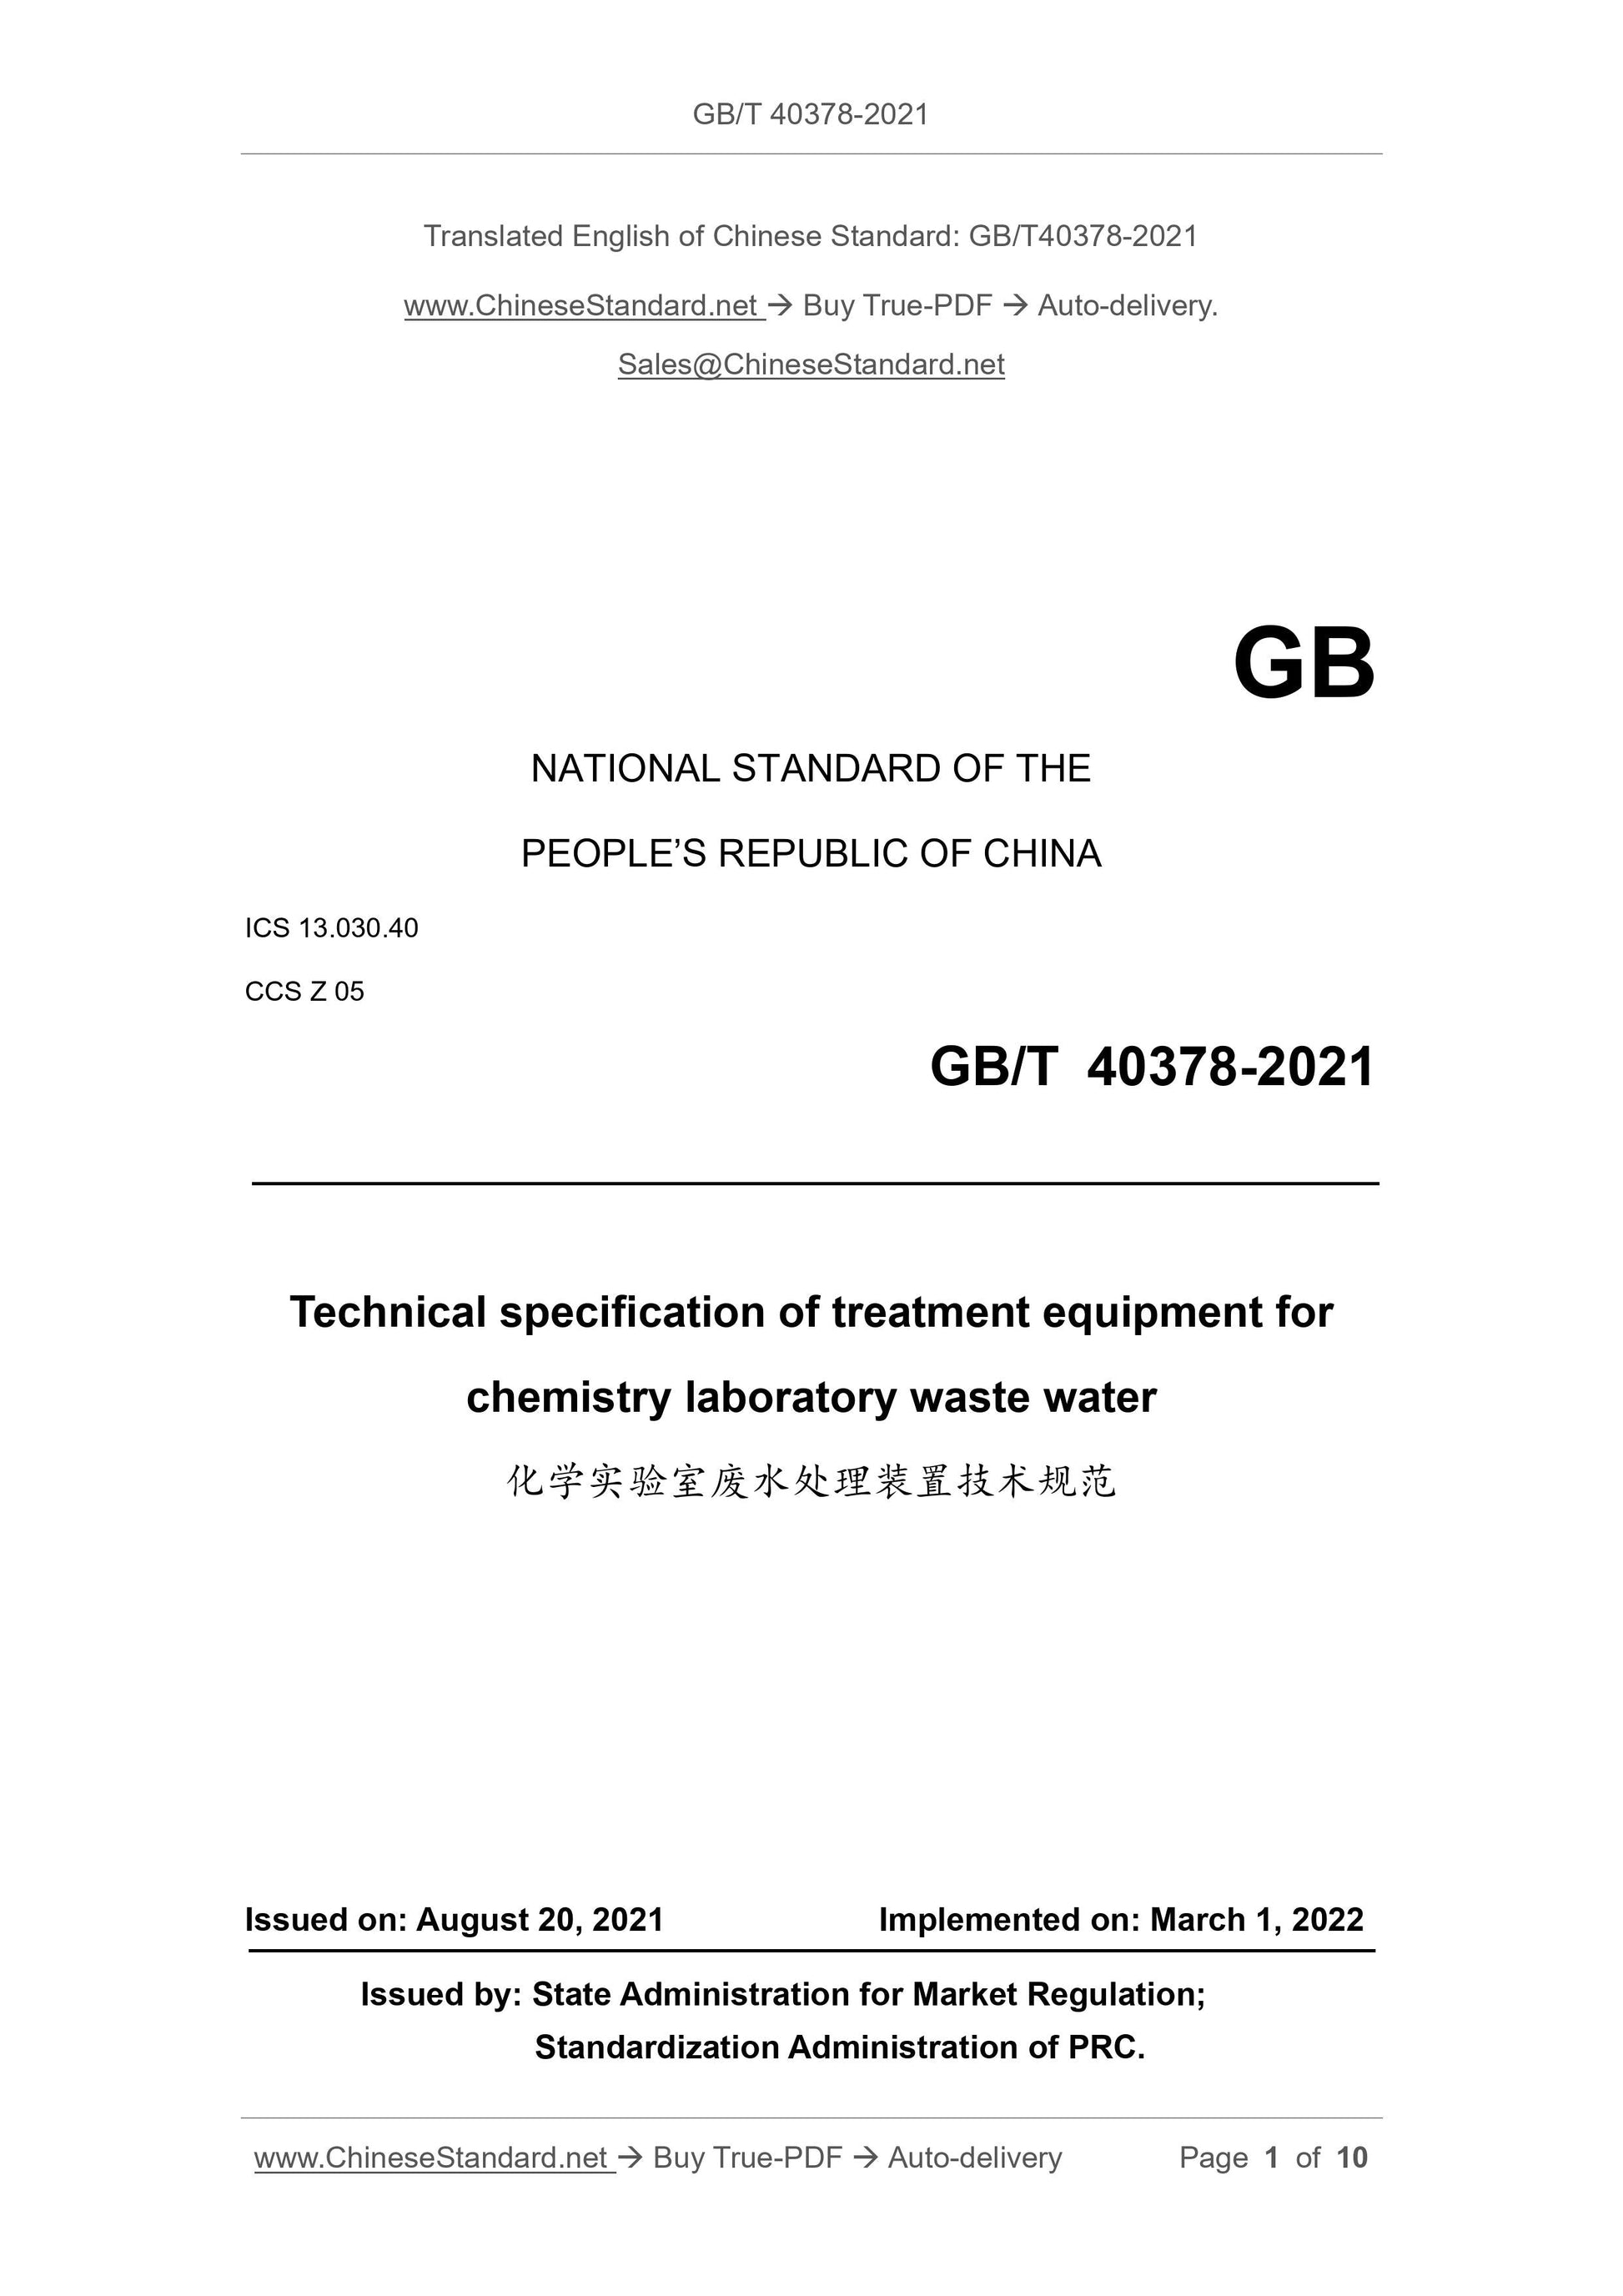 GB/T 40378-2021 Page 1